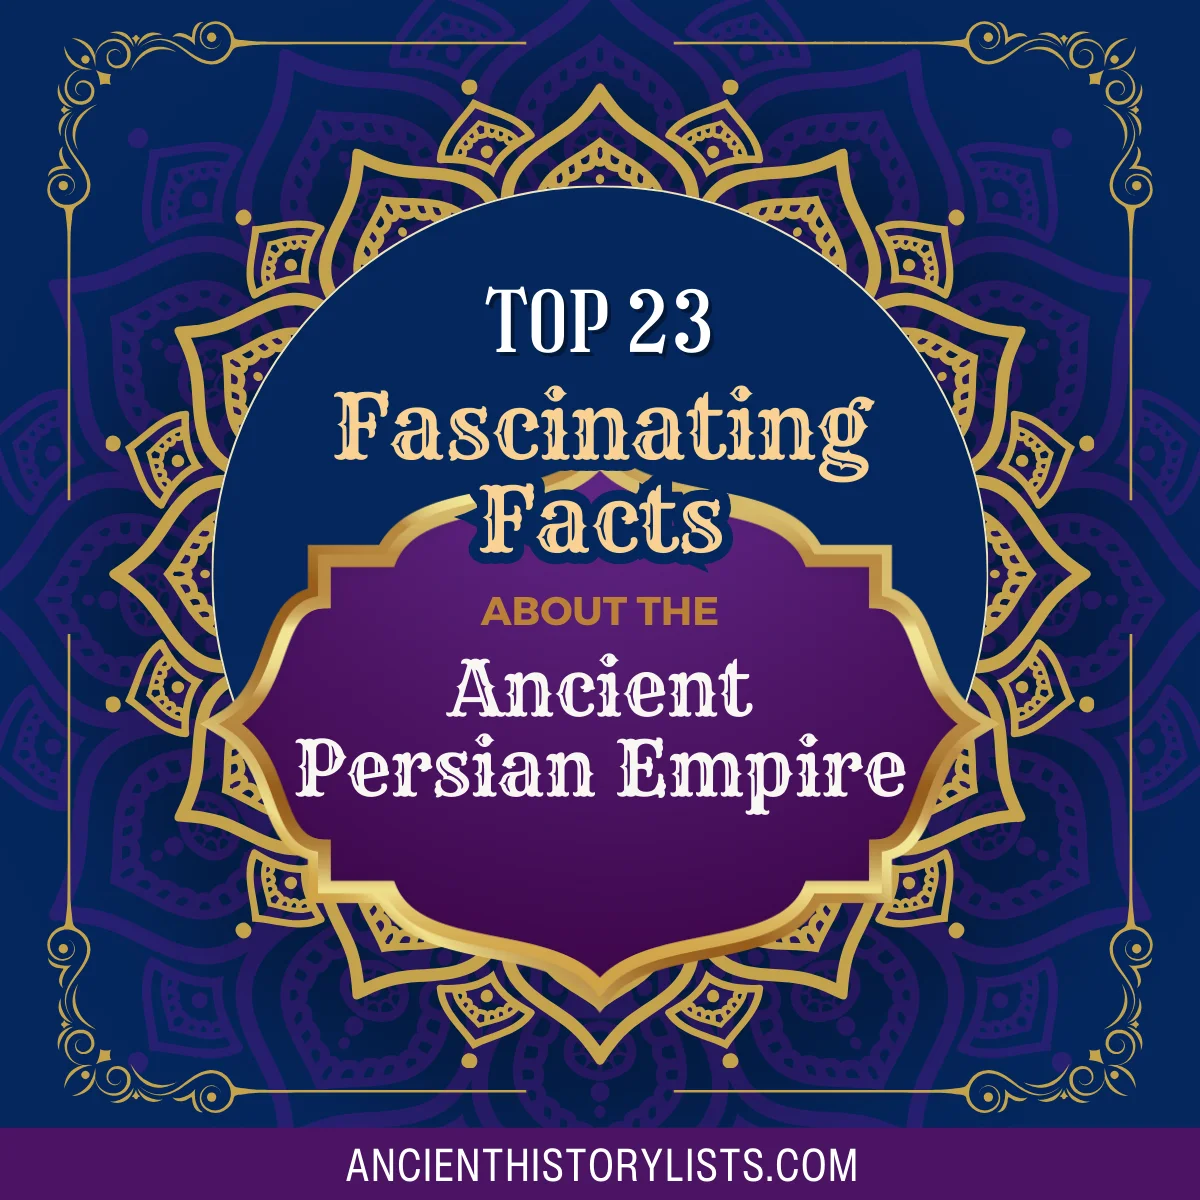 Facts about the Ancient Persian Empire